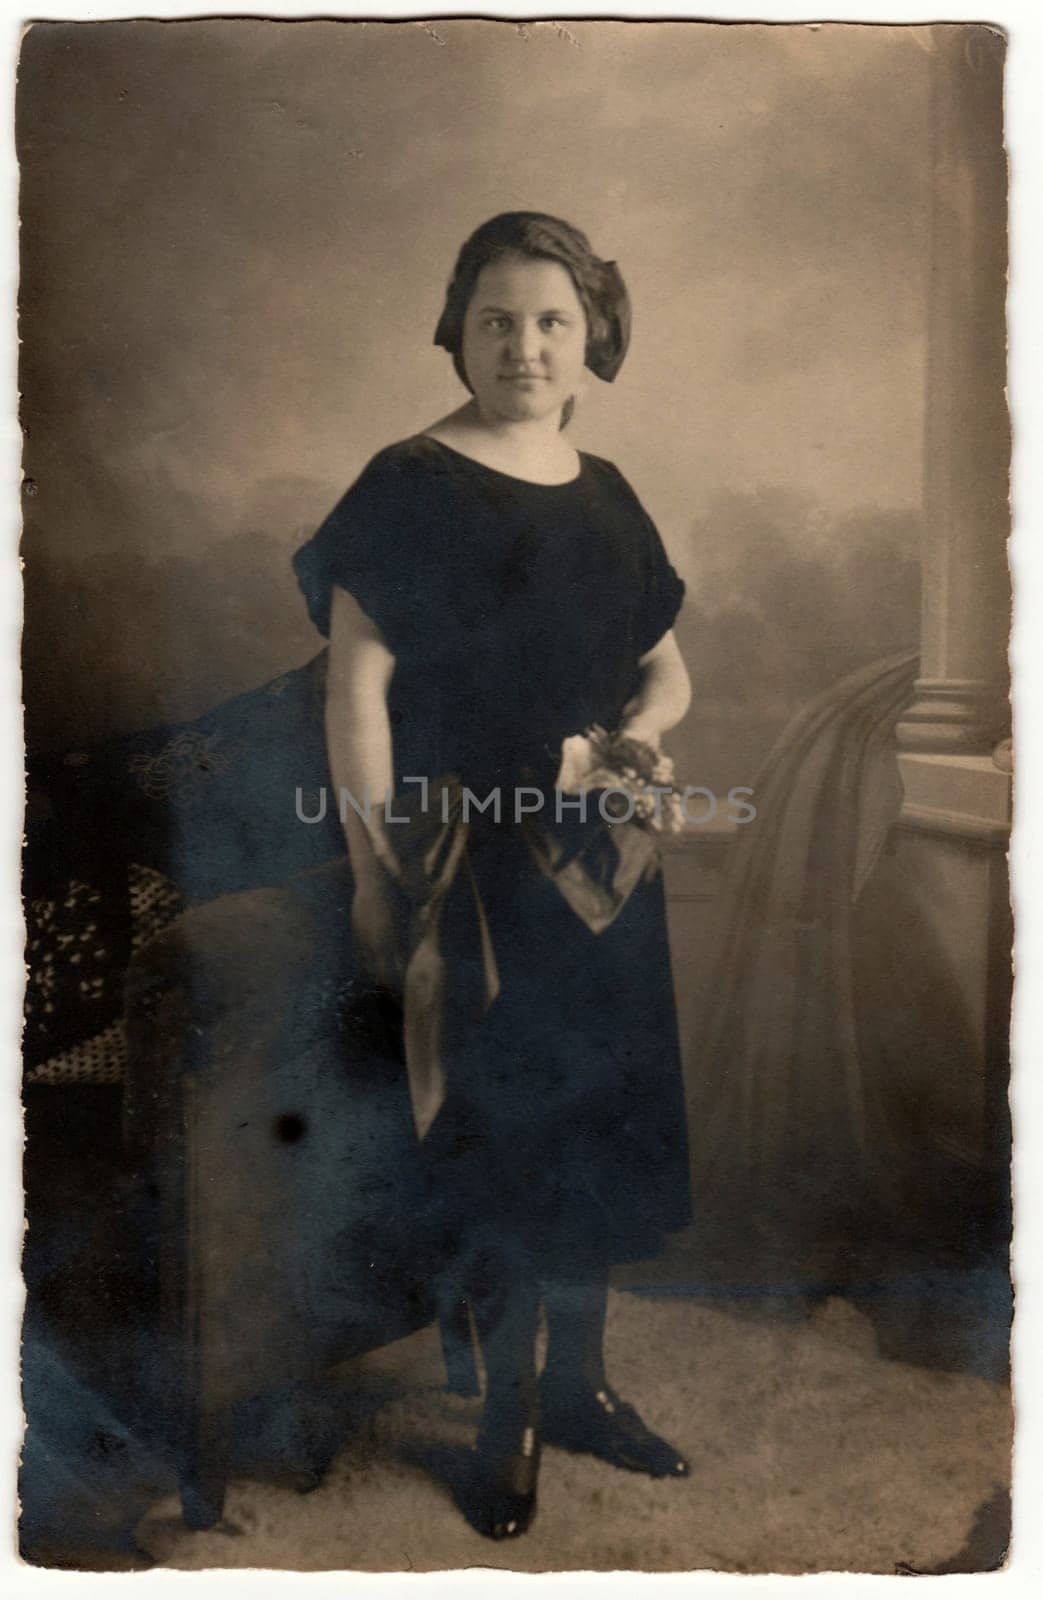 Vintage photo shows woman with short hair. Woman wears black dress and holds bouquet - bunch of flowers. Retro black and white studio photography with sepia effect. Circa 1920s. by roman_nerud